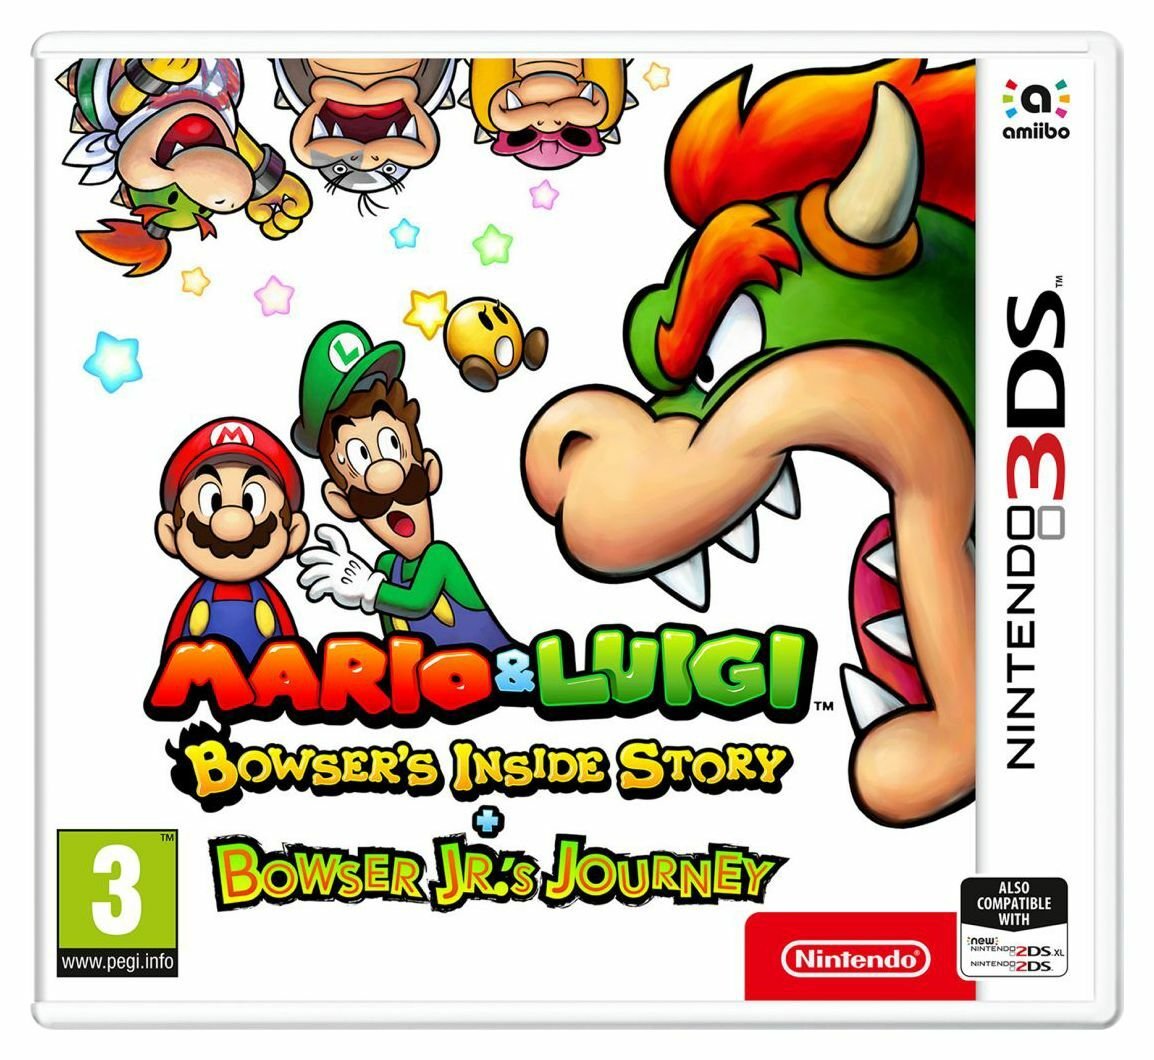 Bowser's Inside Story & Bowser Jrs Journey Nintendo 3DS Game Review